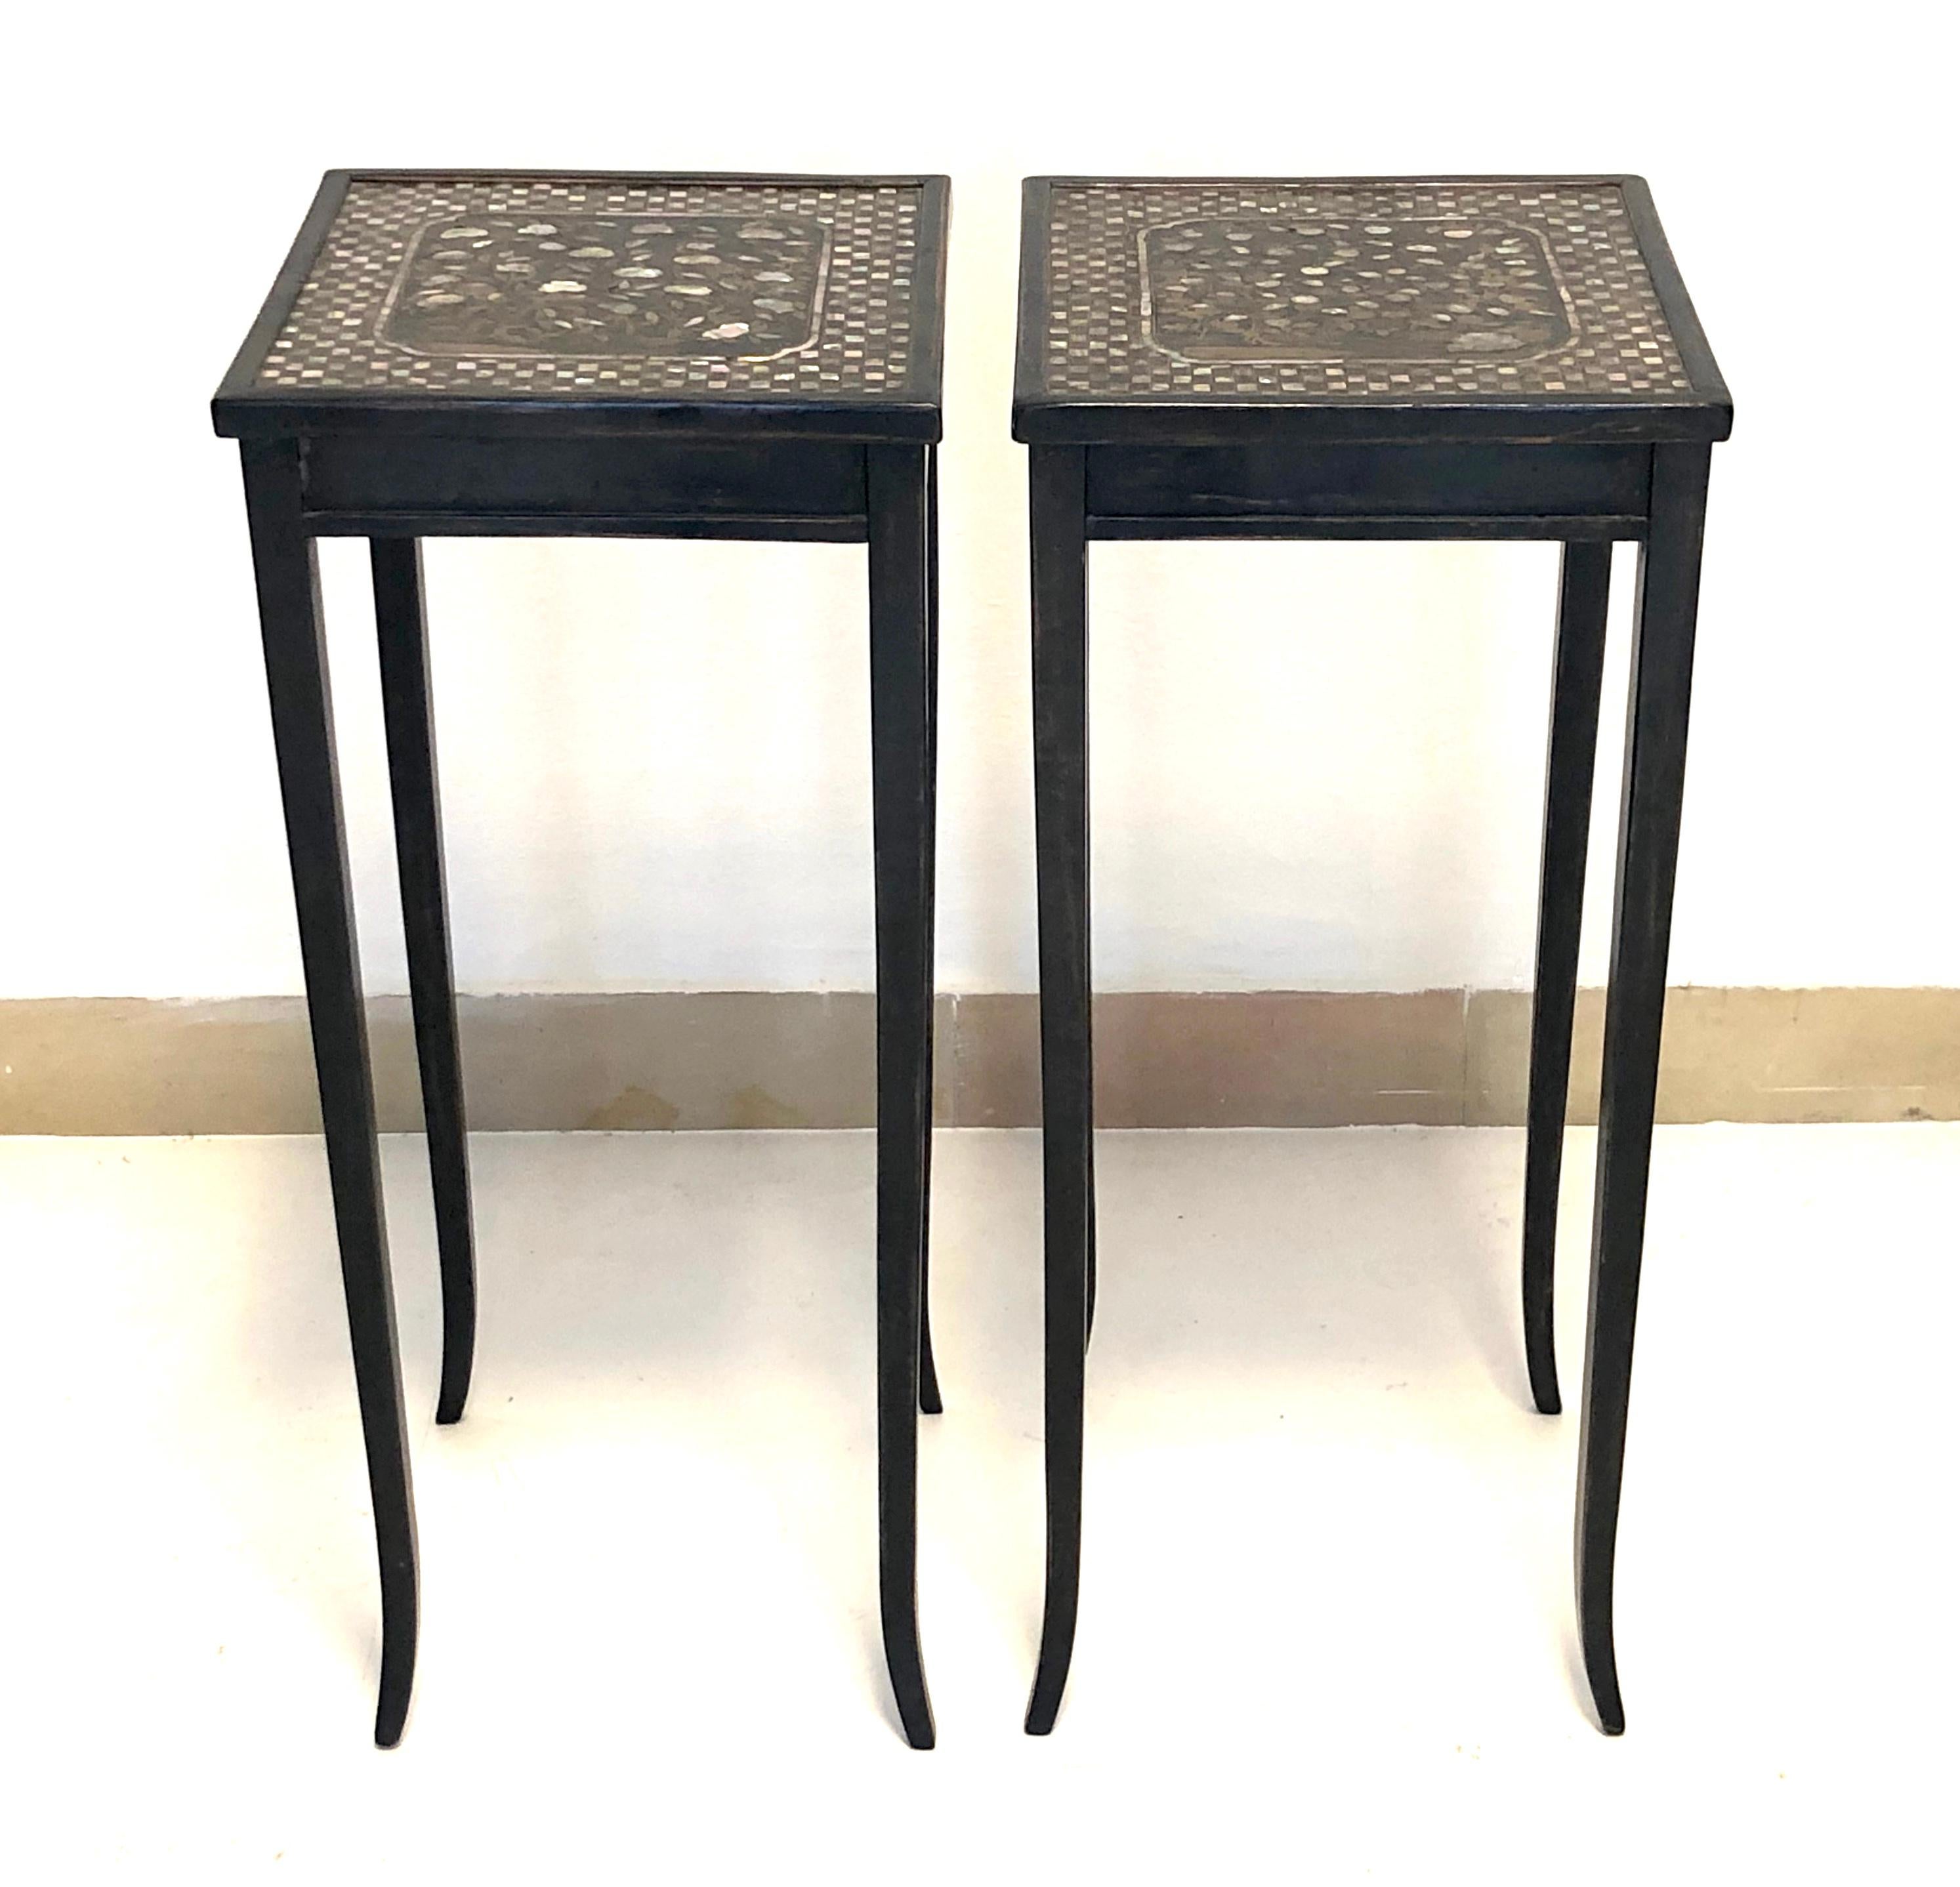 Extremely rare small pair of 19th century black lacquer tables with rare 17th century table tops. The table tops are decorated with mother of pearl inlay and date from the Momoyama period of 17th century Japan. The chequer board outer edge surrounds